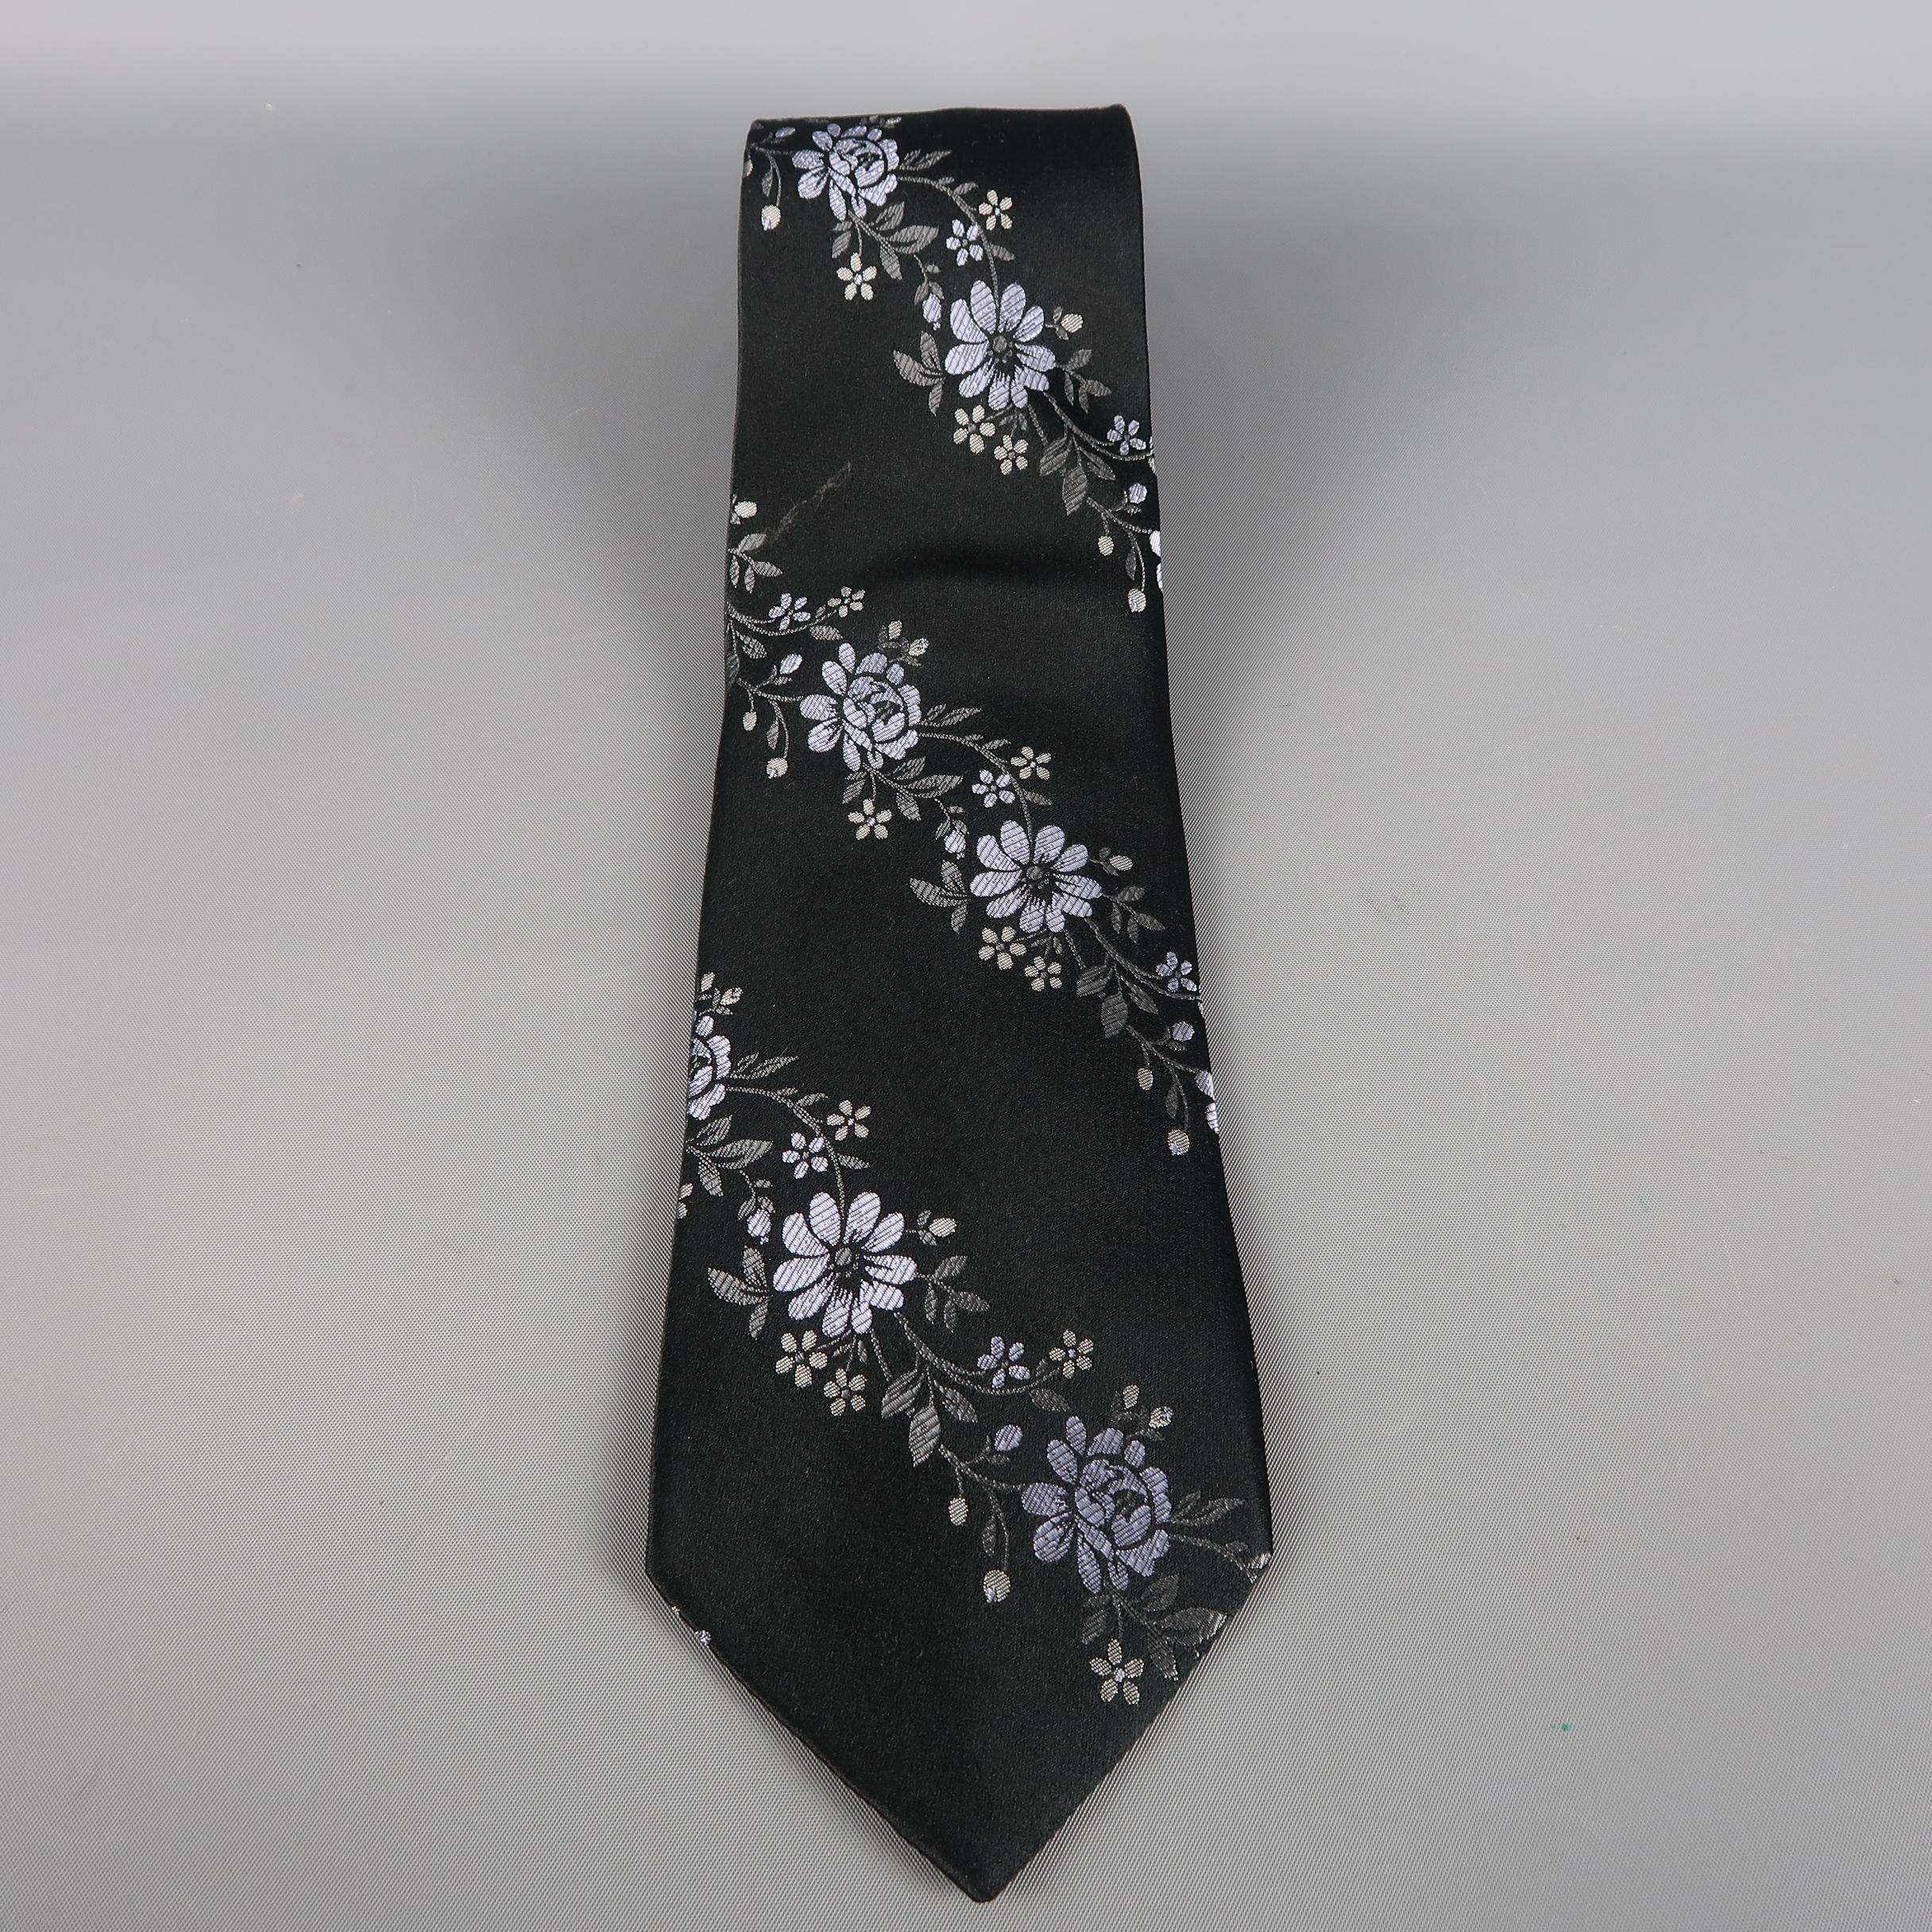 VALENTINO  tie come in black silk with all over woven lavender flowers. Made in Italy.
 
Excellent Pre-Owned Condition.
 
Width: 3.5 in.